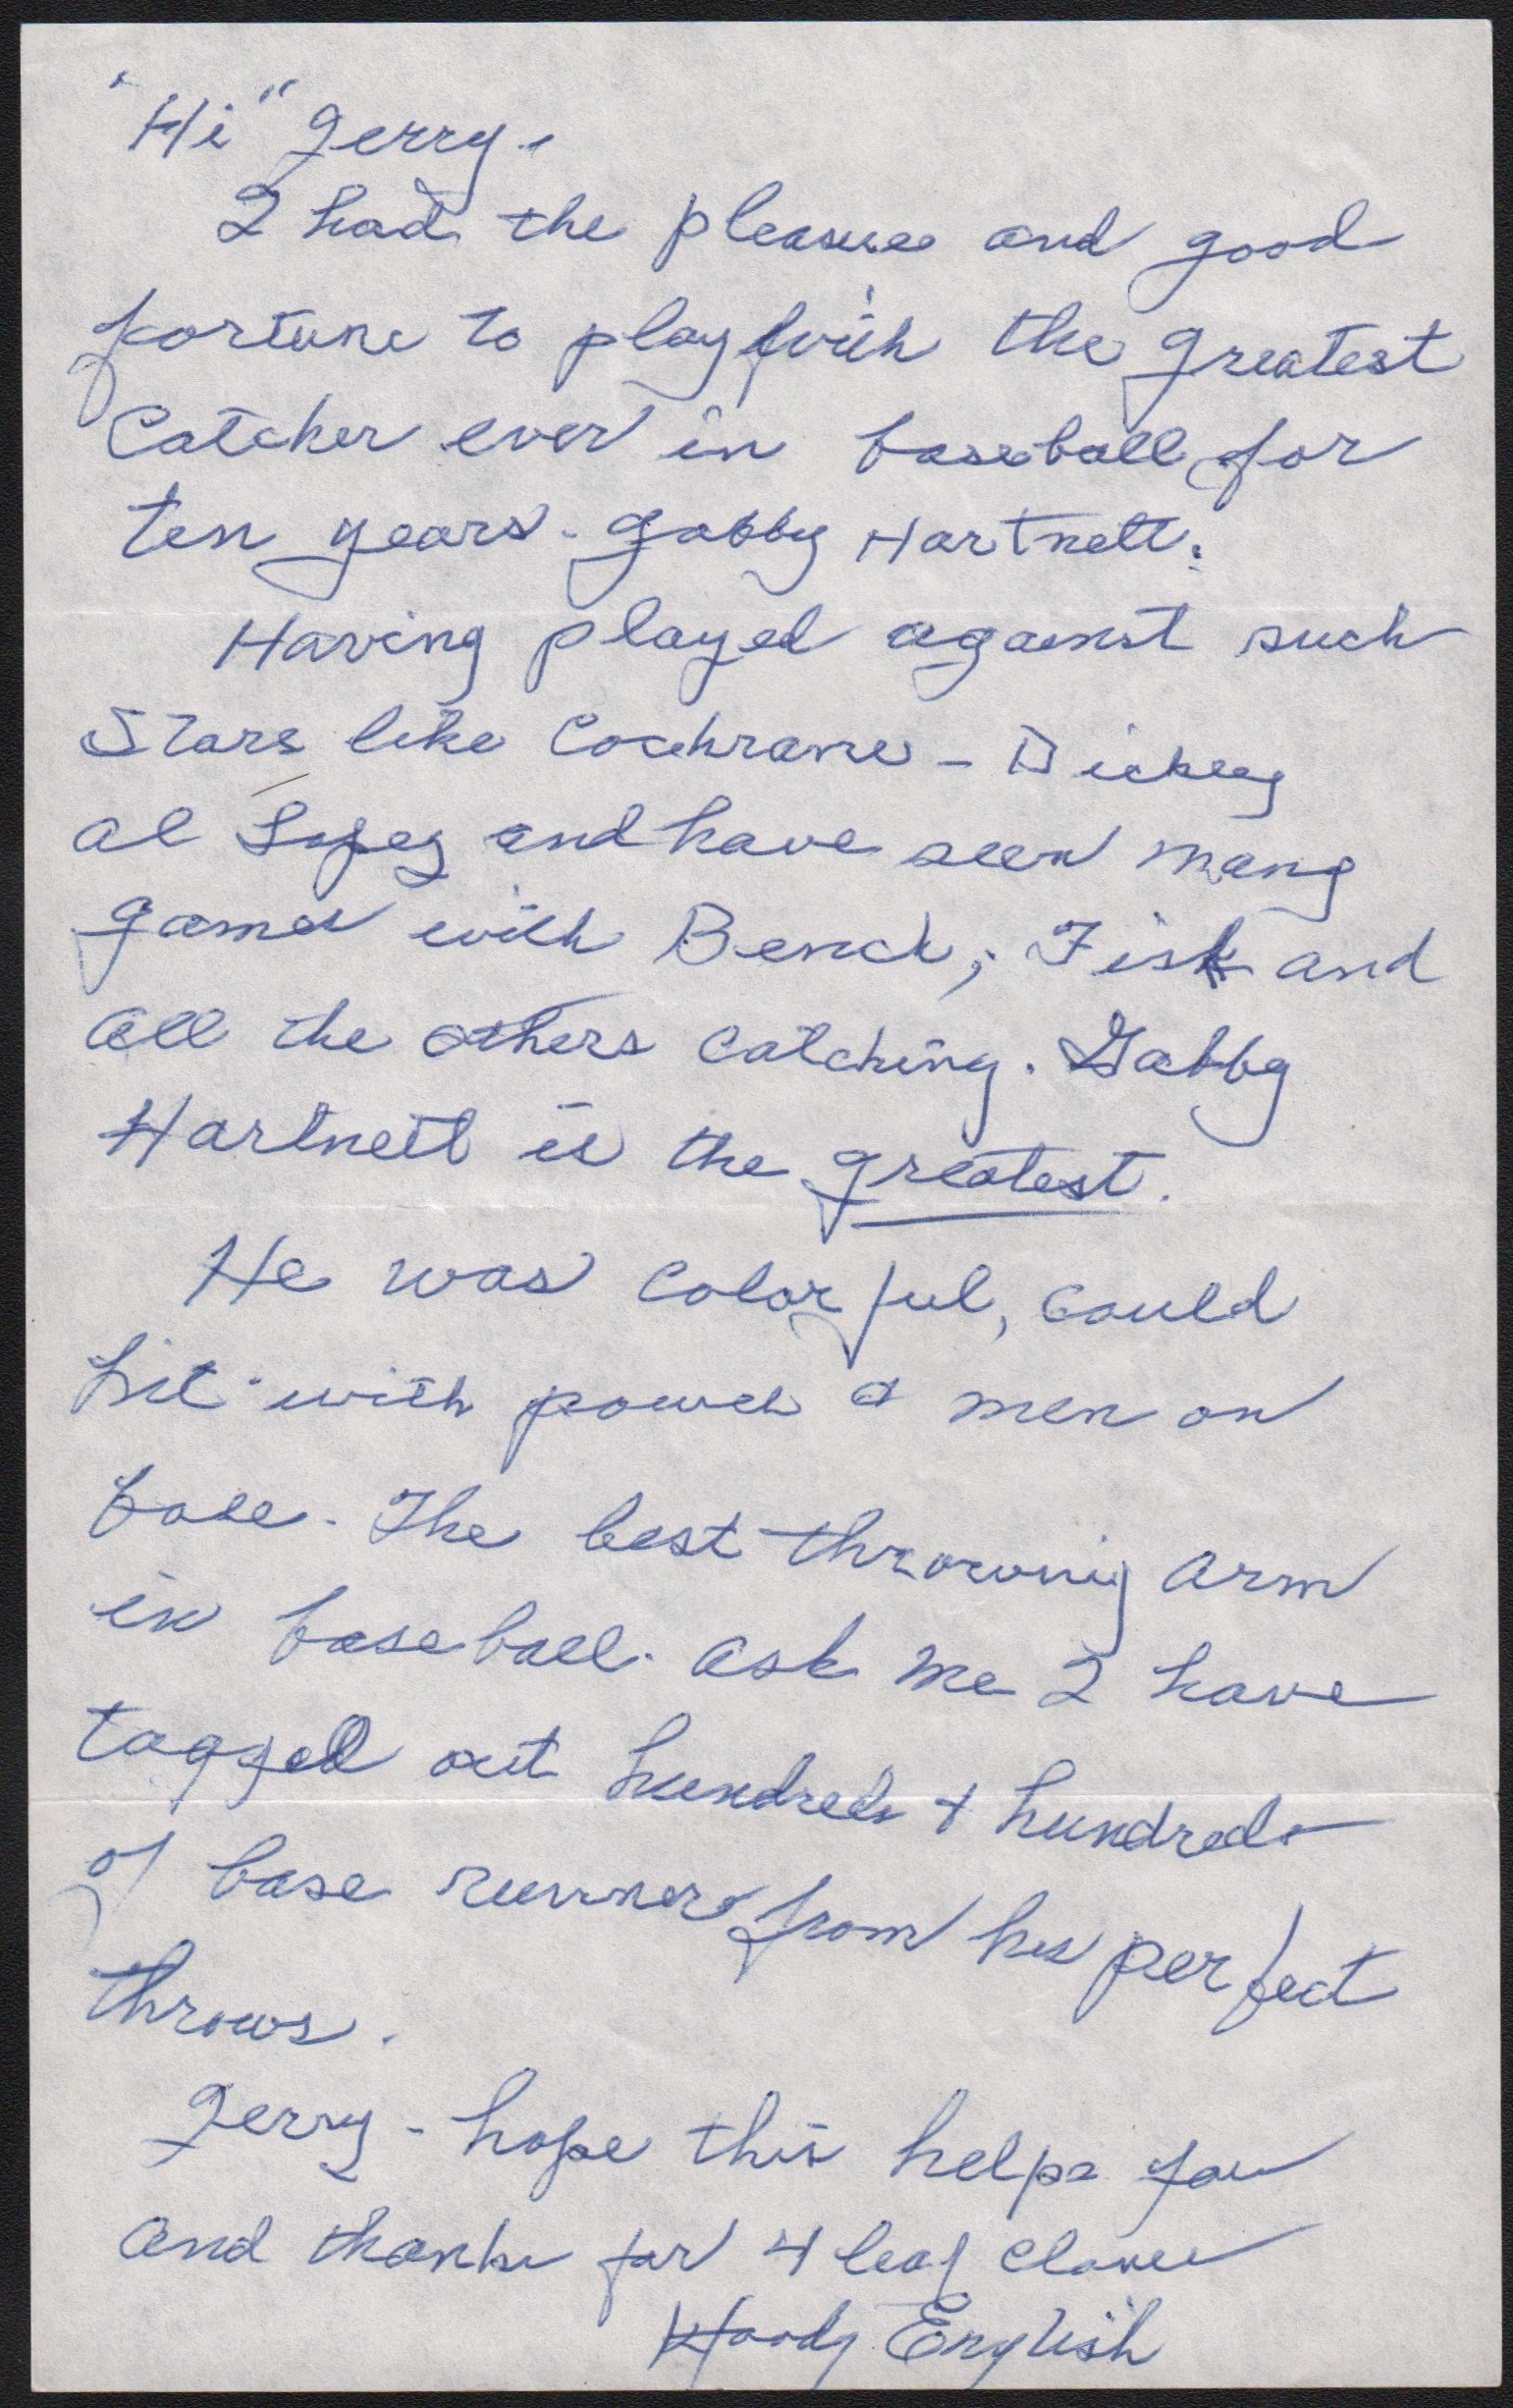 - Woody English Hand Written Letter w/ "Greatest Catchers" Content